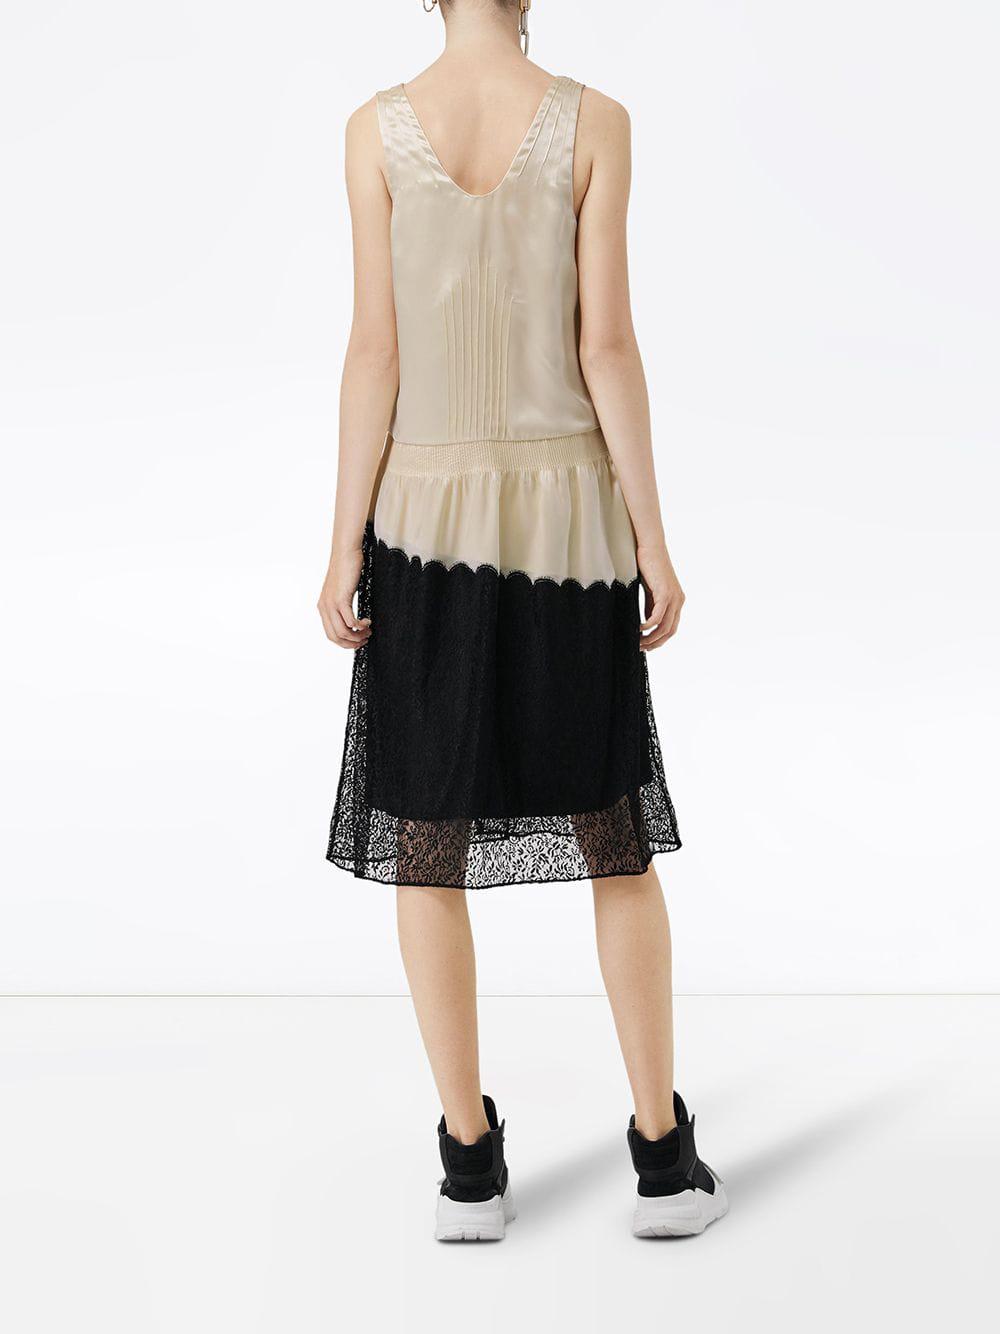 Lyst - Burberry Silk Satin And Lace Sleeveless Dress in Black